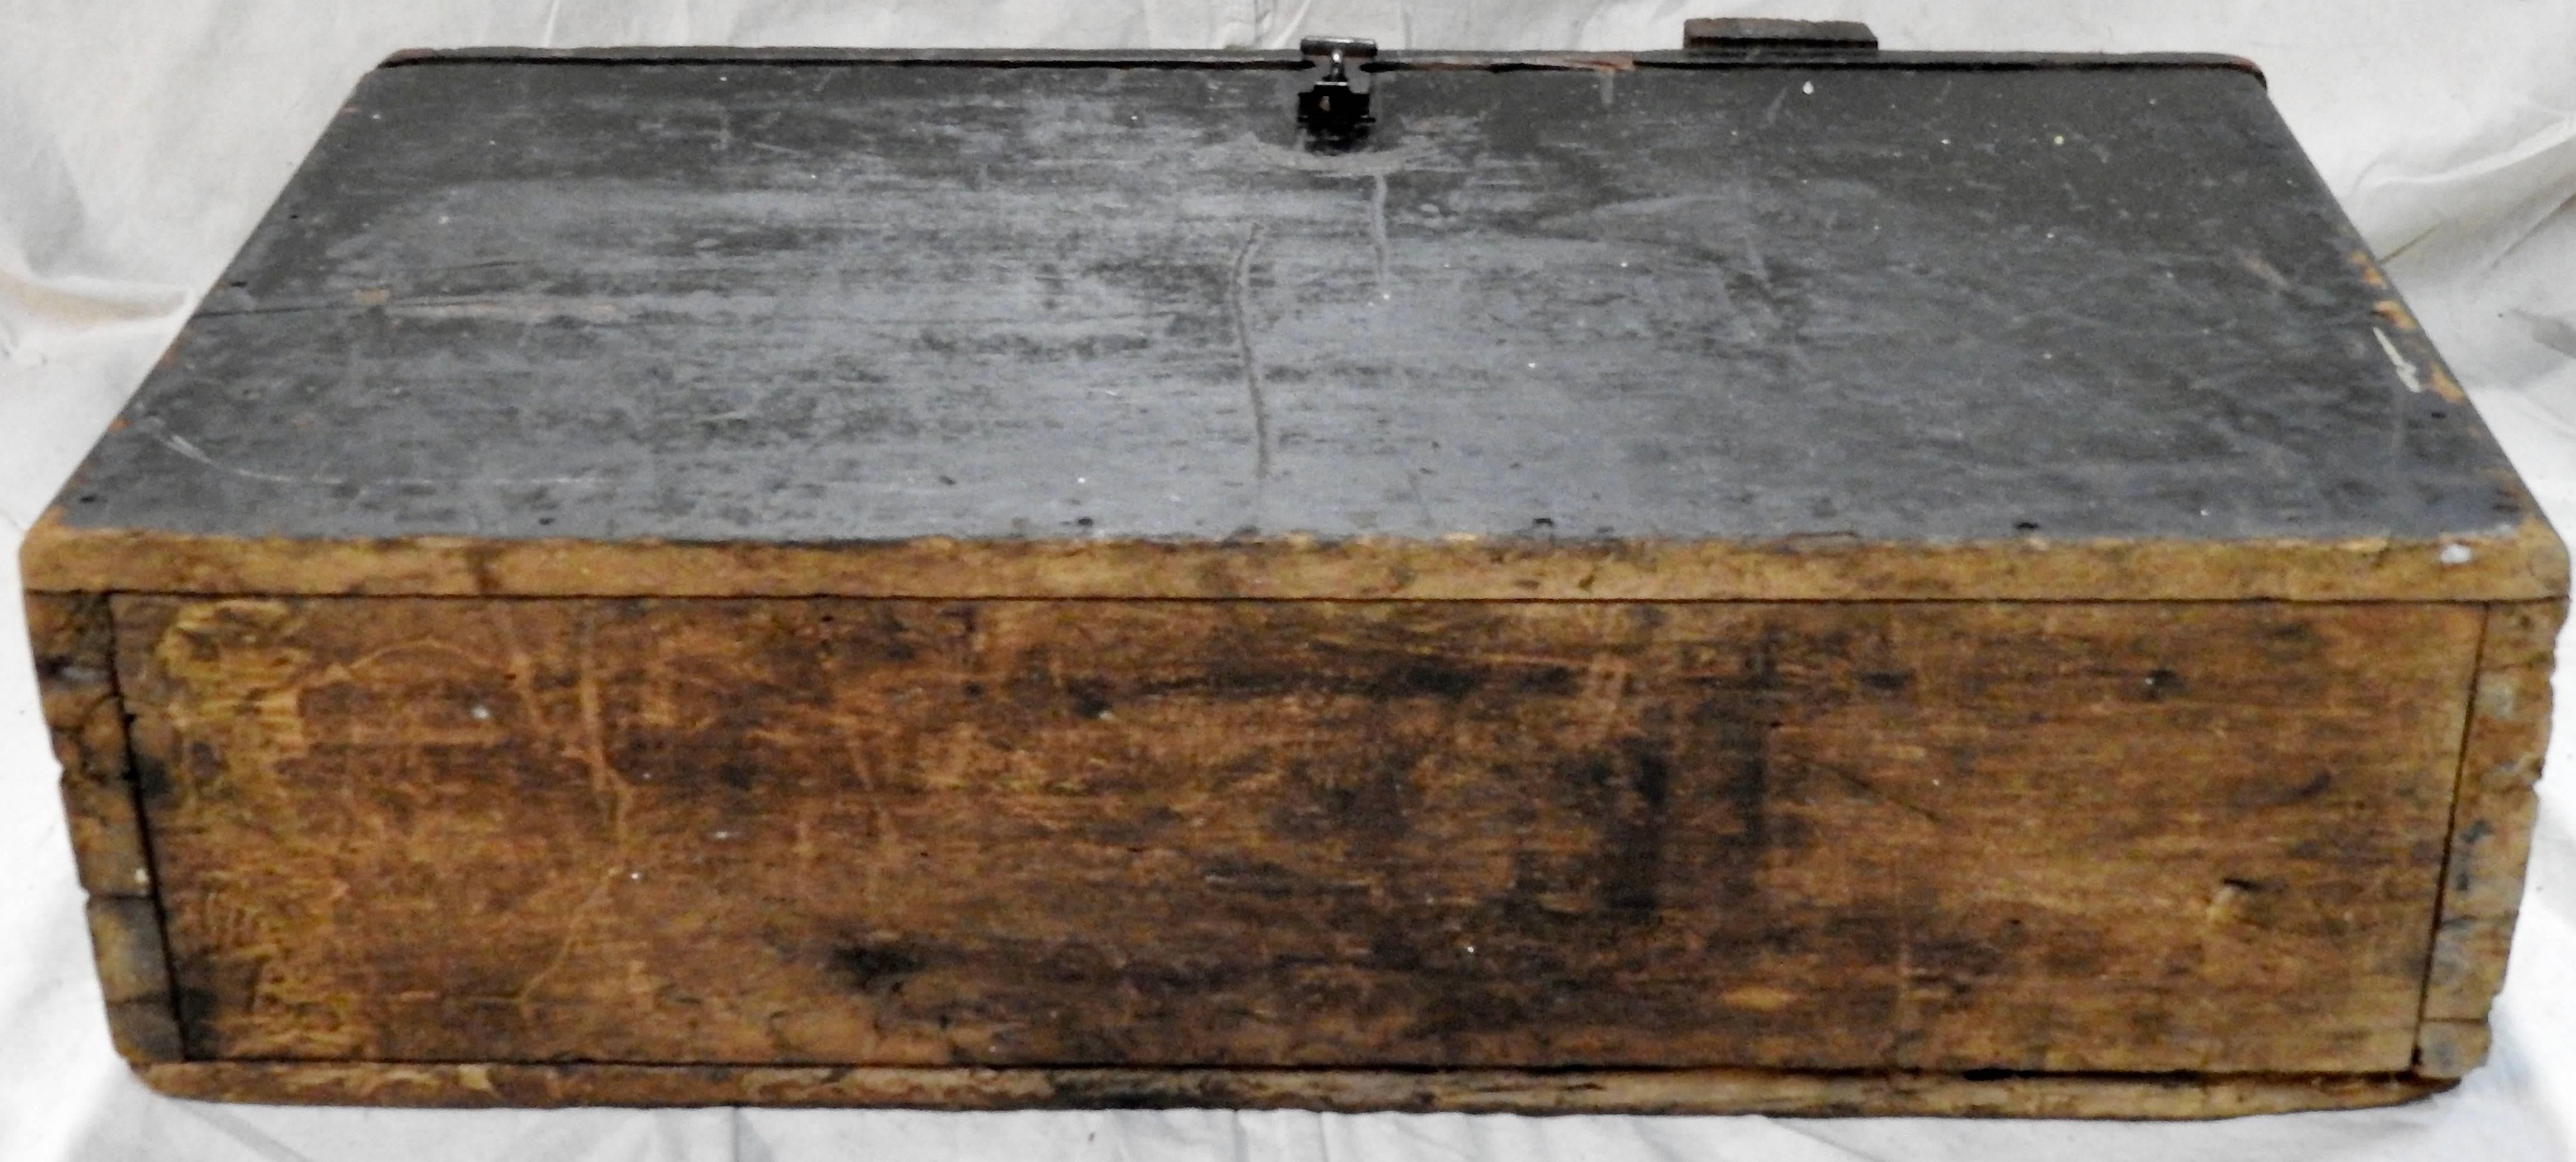 Tool Box Wooden with Leather Details Primitive For Sale 2